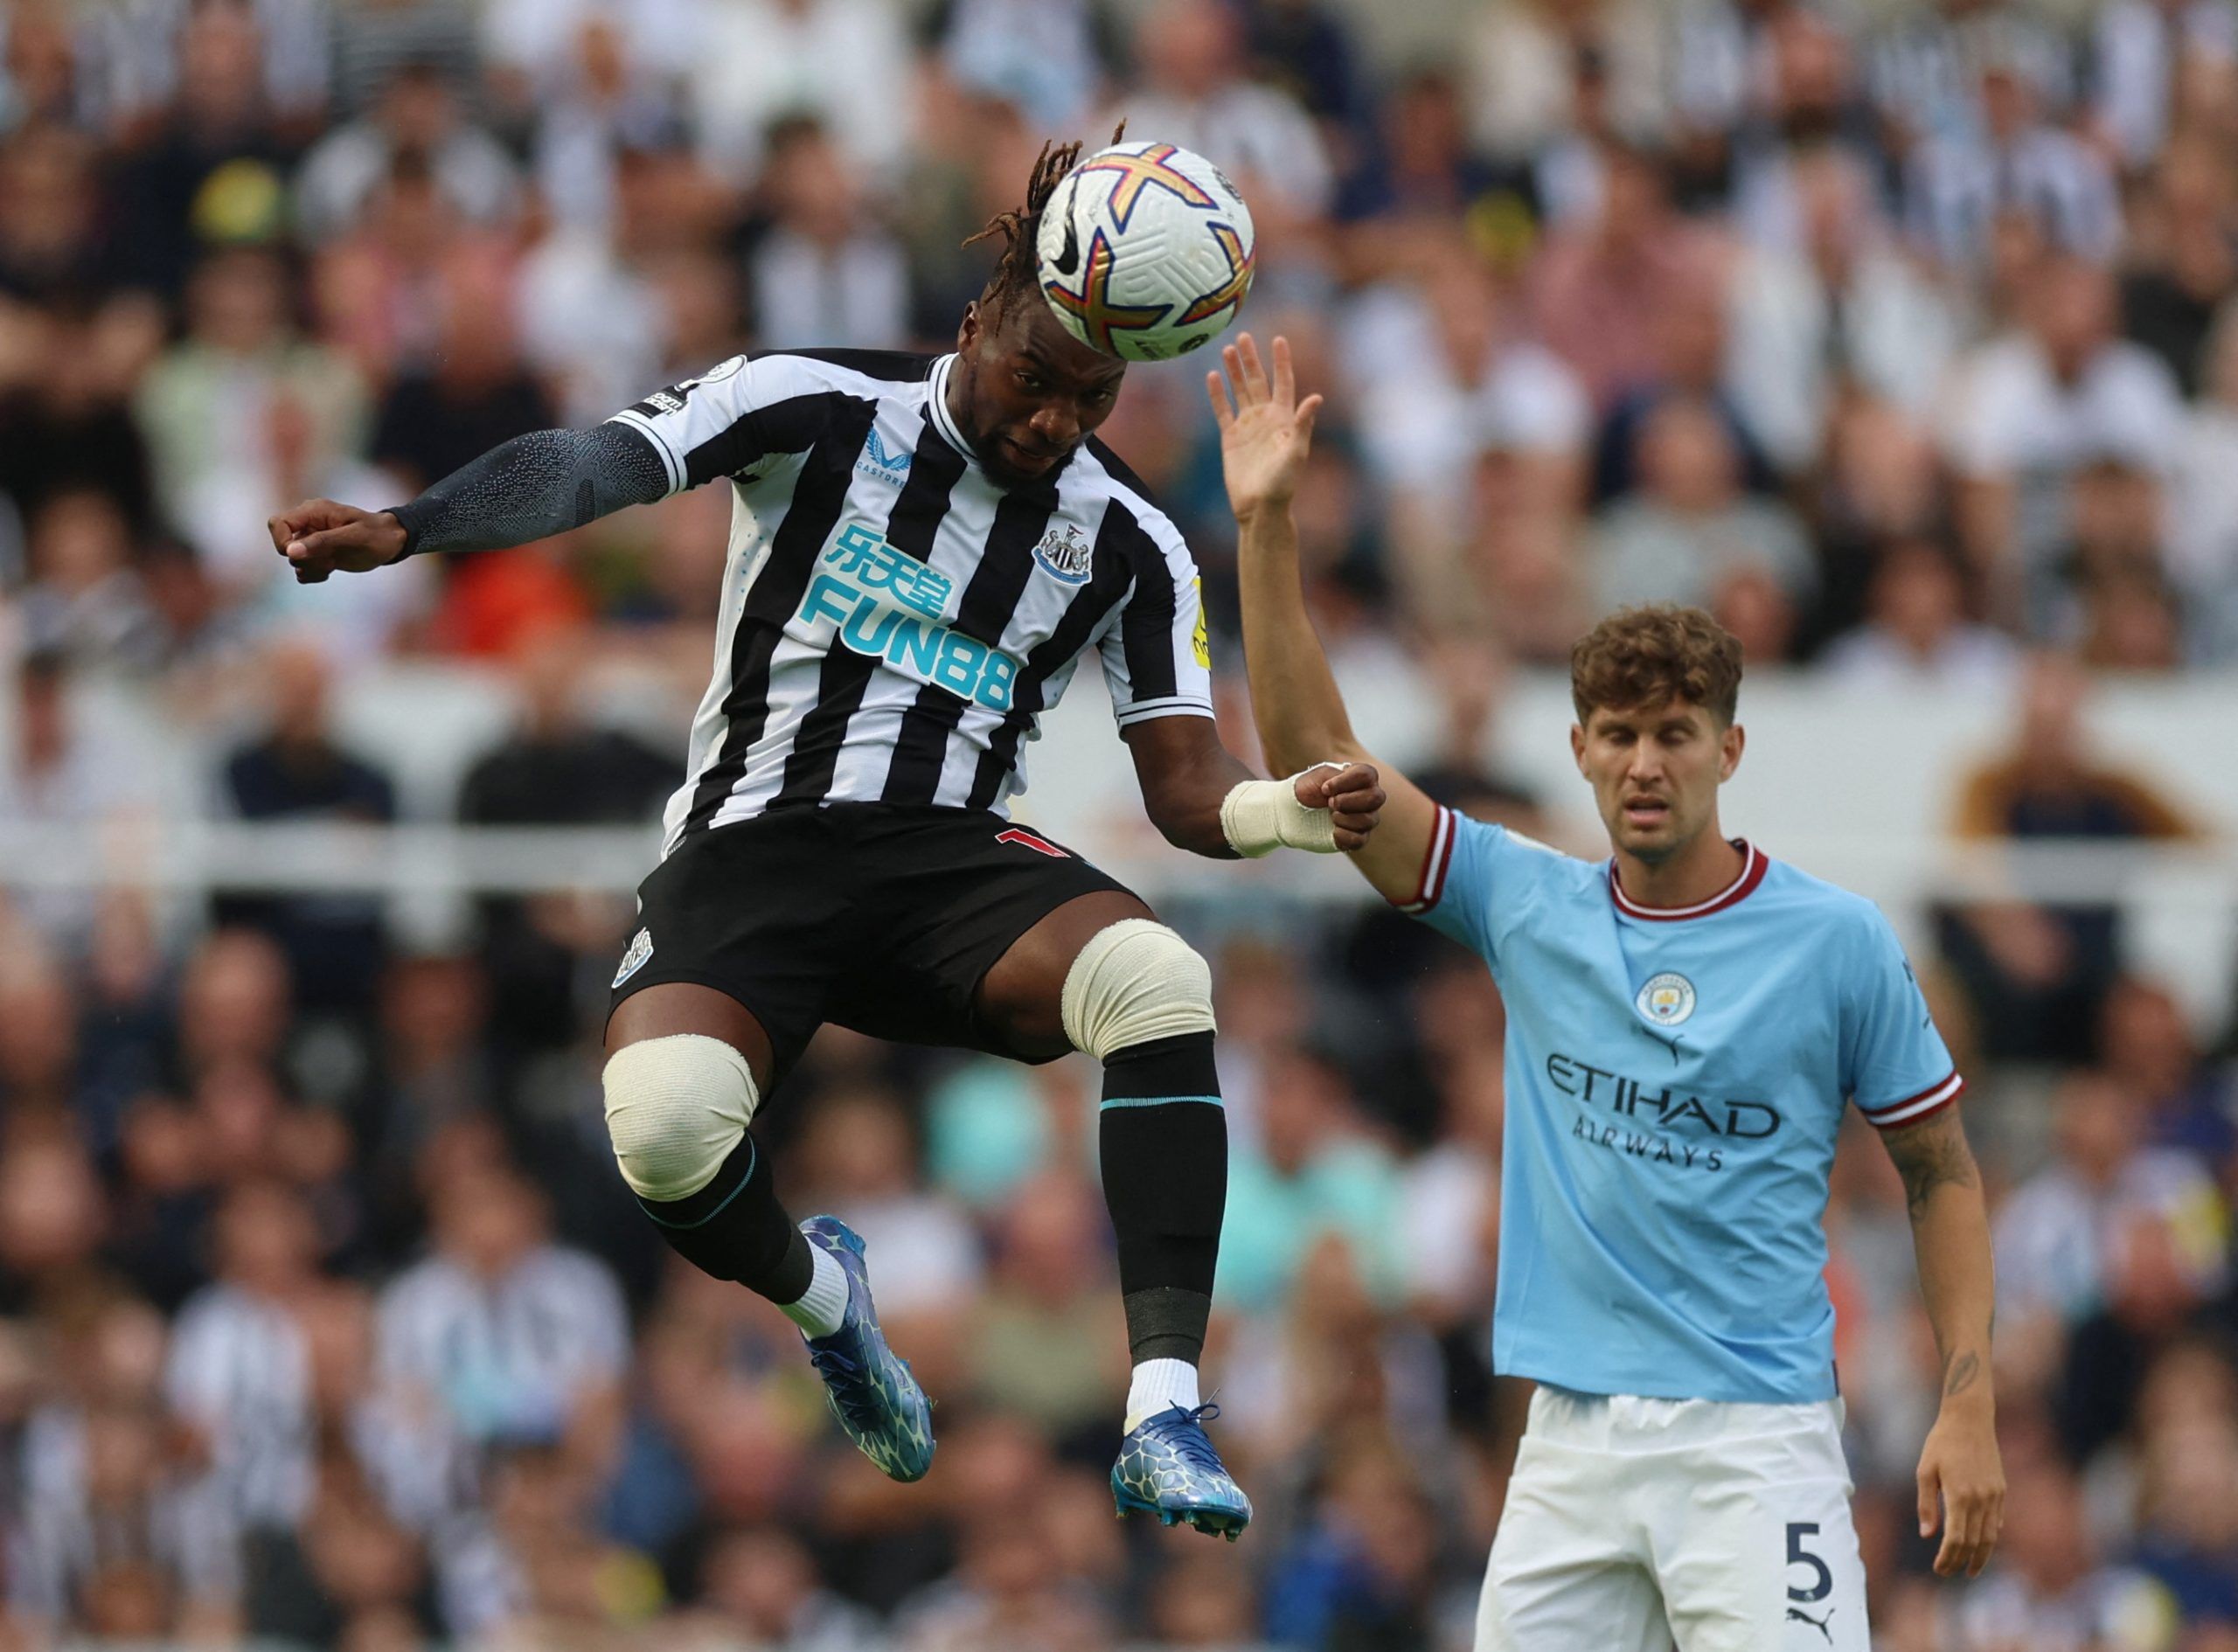 Soccer Football - Premier League - Newcastle United v Manchester City - St James' Park, Newcastle, Britain - August 21, 2022 Newcastle United's Allan Saint-Maximin in action with Manchester City's John Stones Action Images via Reuters/Lee Smith EDITORIAL USE ONLY. No use with unauthorized audio, video, data, fixture lists, club/league logos or 'live' services. Online in-match use limited to 75 images, no video emulation. No use in betting, games or single club /league/player publications.  Pleas